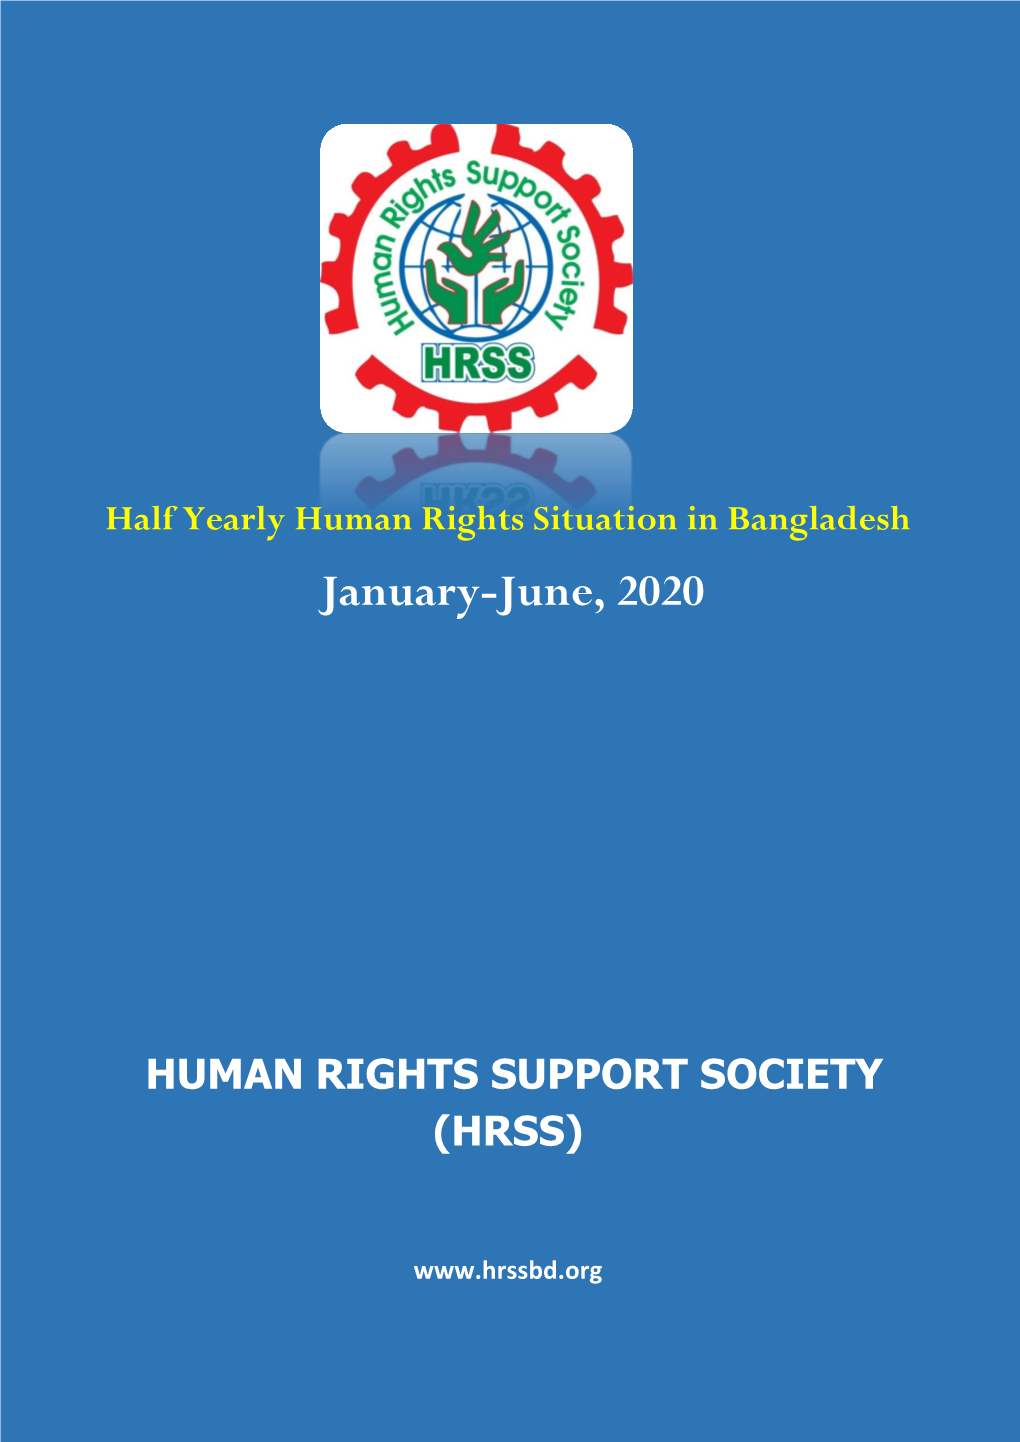 Half Yearly Human Rights Situation Report'2020